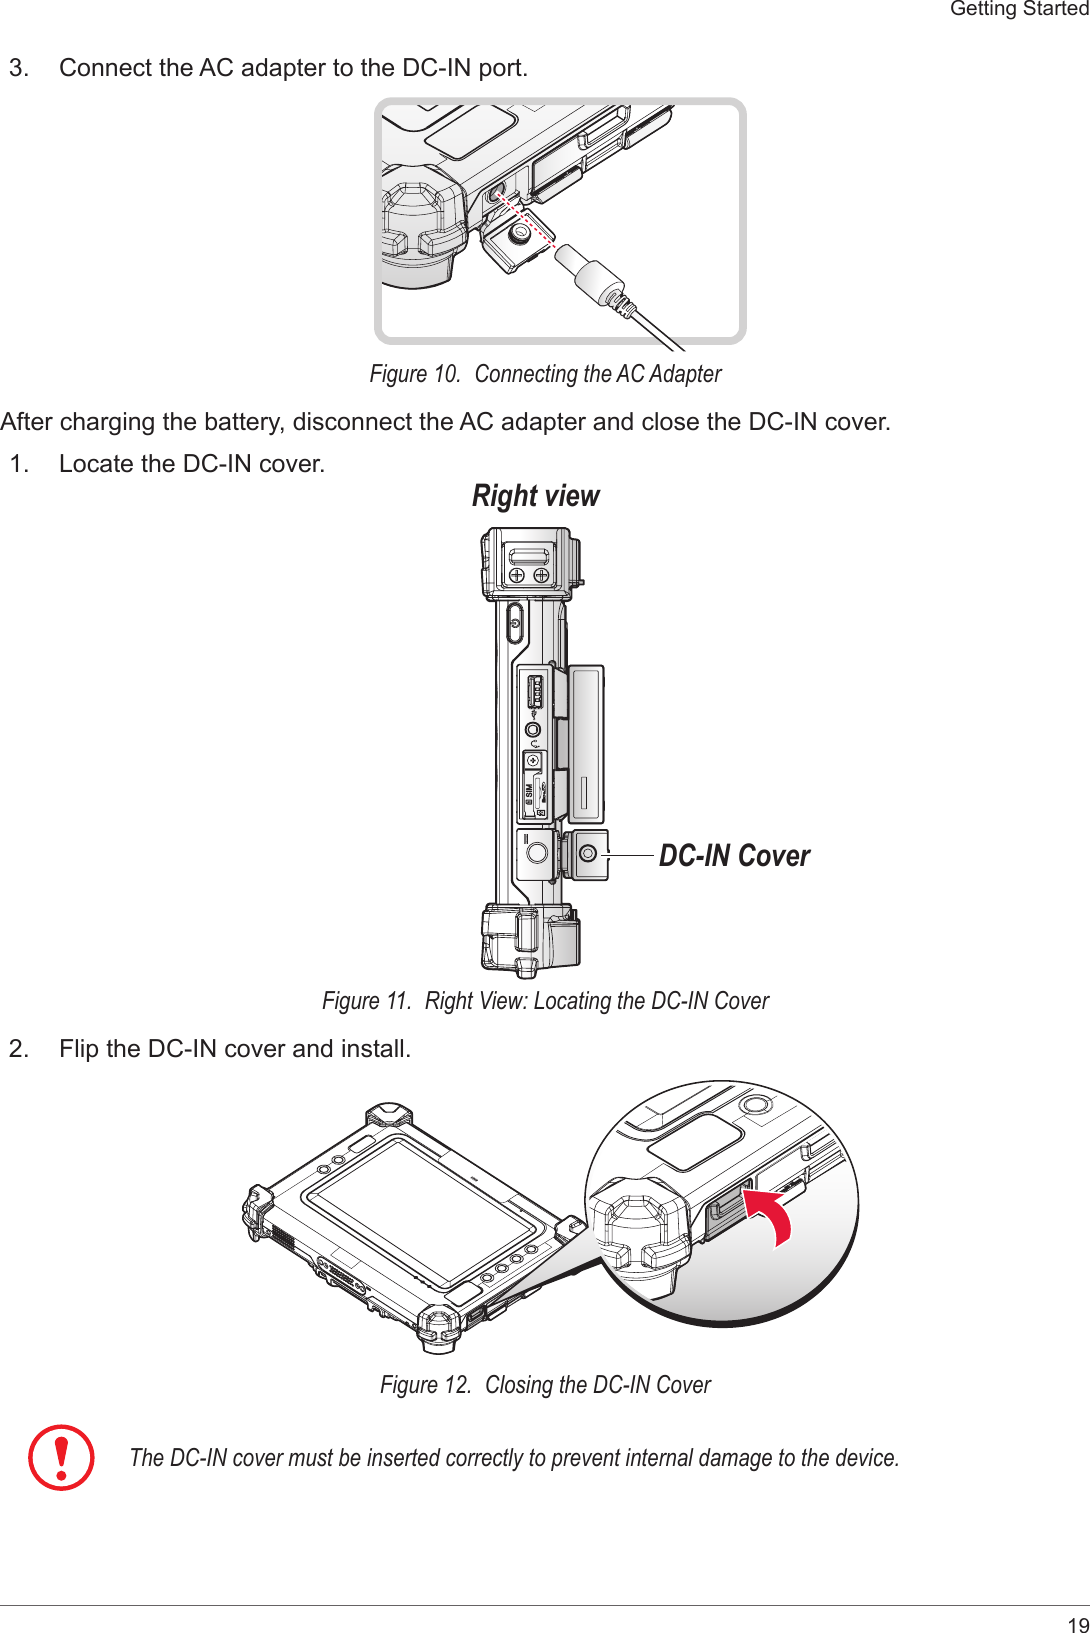 19Getting Started3.  Connect the AC adapter to the DC-IN port.Figure 10.  Connecting the AC AdapterAfter charging the battery, disconnect the AC adapter and close the DC-IN cover.1.  Locate the DC-IN cover.Right viewDC-IN CoverFigure 11.  Right View: Locating the DC-IN Cover2.  Flip the DC-IN cover and install.Figure 12.  Closing the DC-IN CoverThe DC-IN cover must be inserted correctly to prevent internal damage to the device.